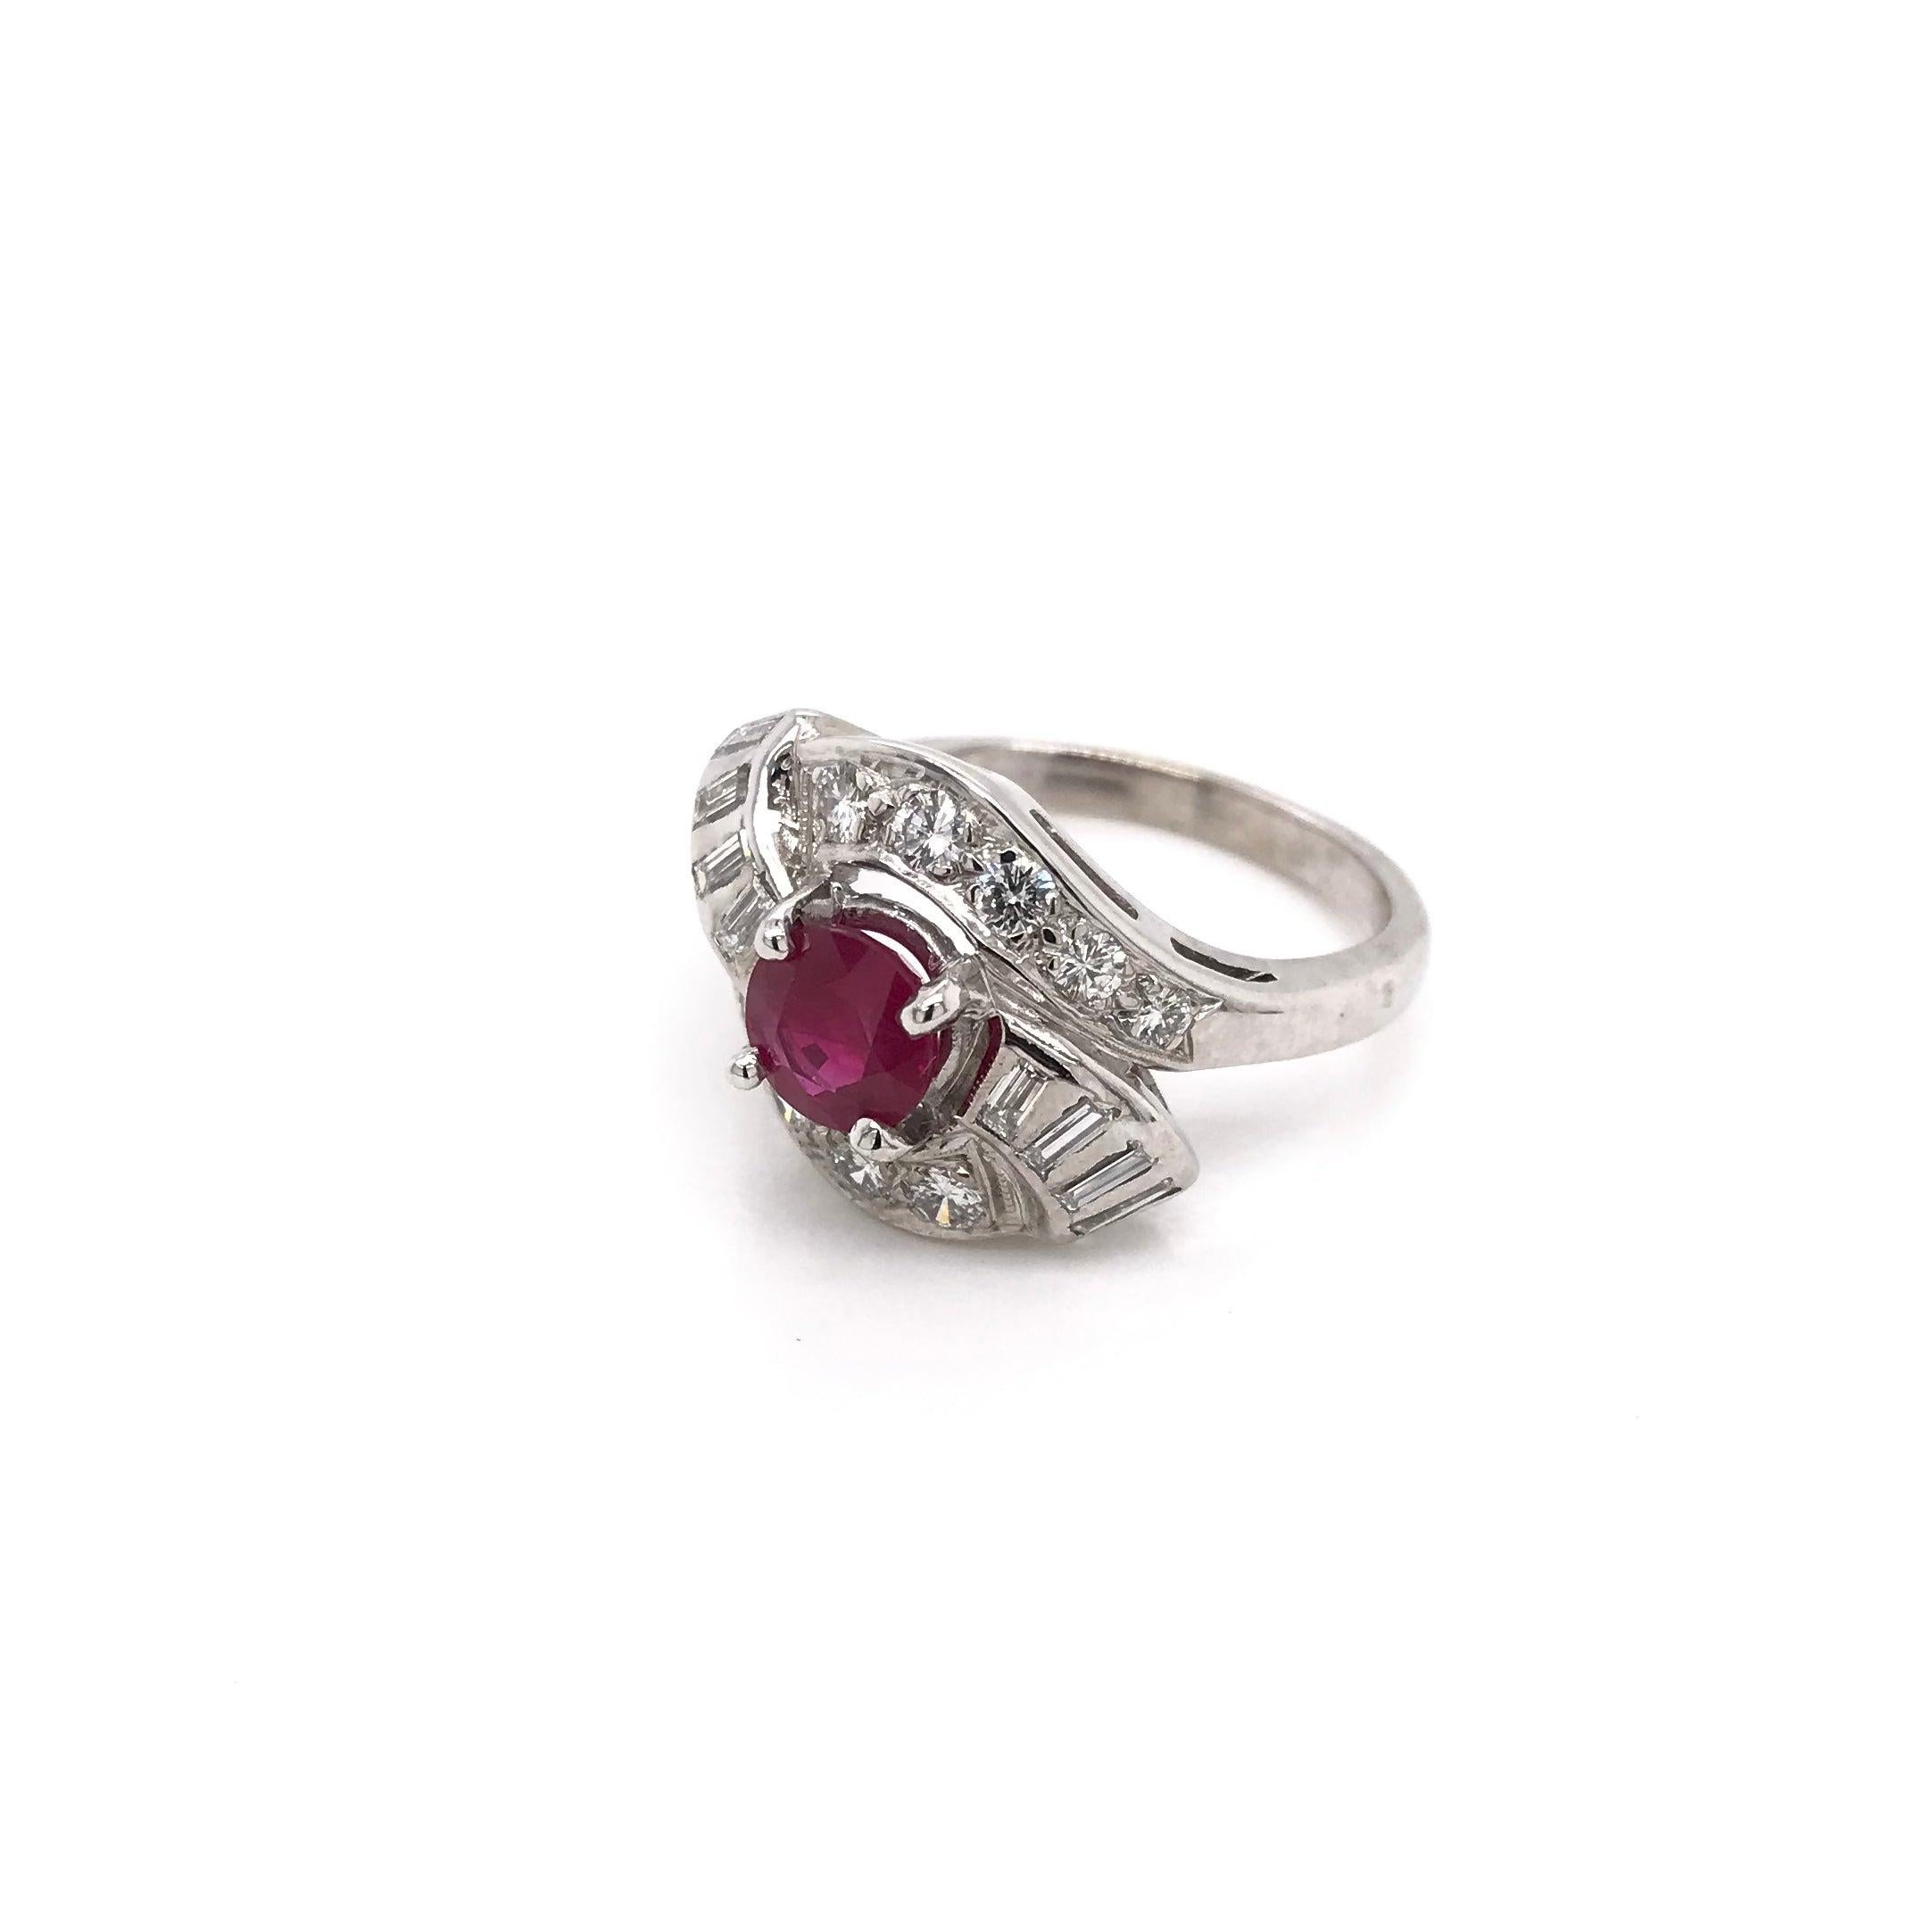 This piece was crafted sometime during the Retro design era ( 1940-1960 ). The setting is 14k white gold and features a beautiful center ruby. The ruby is richly hued and measures approximately 1.01 carats. The 14k white gold setting features 10